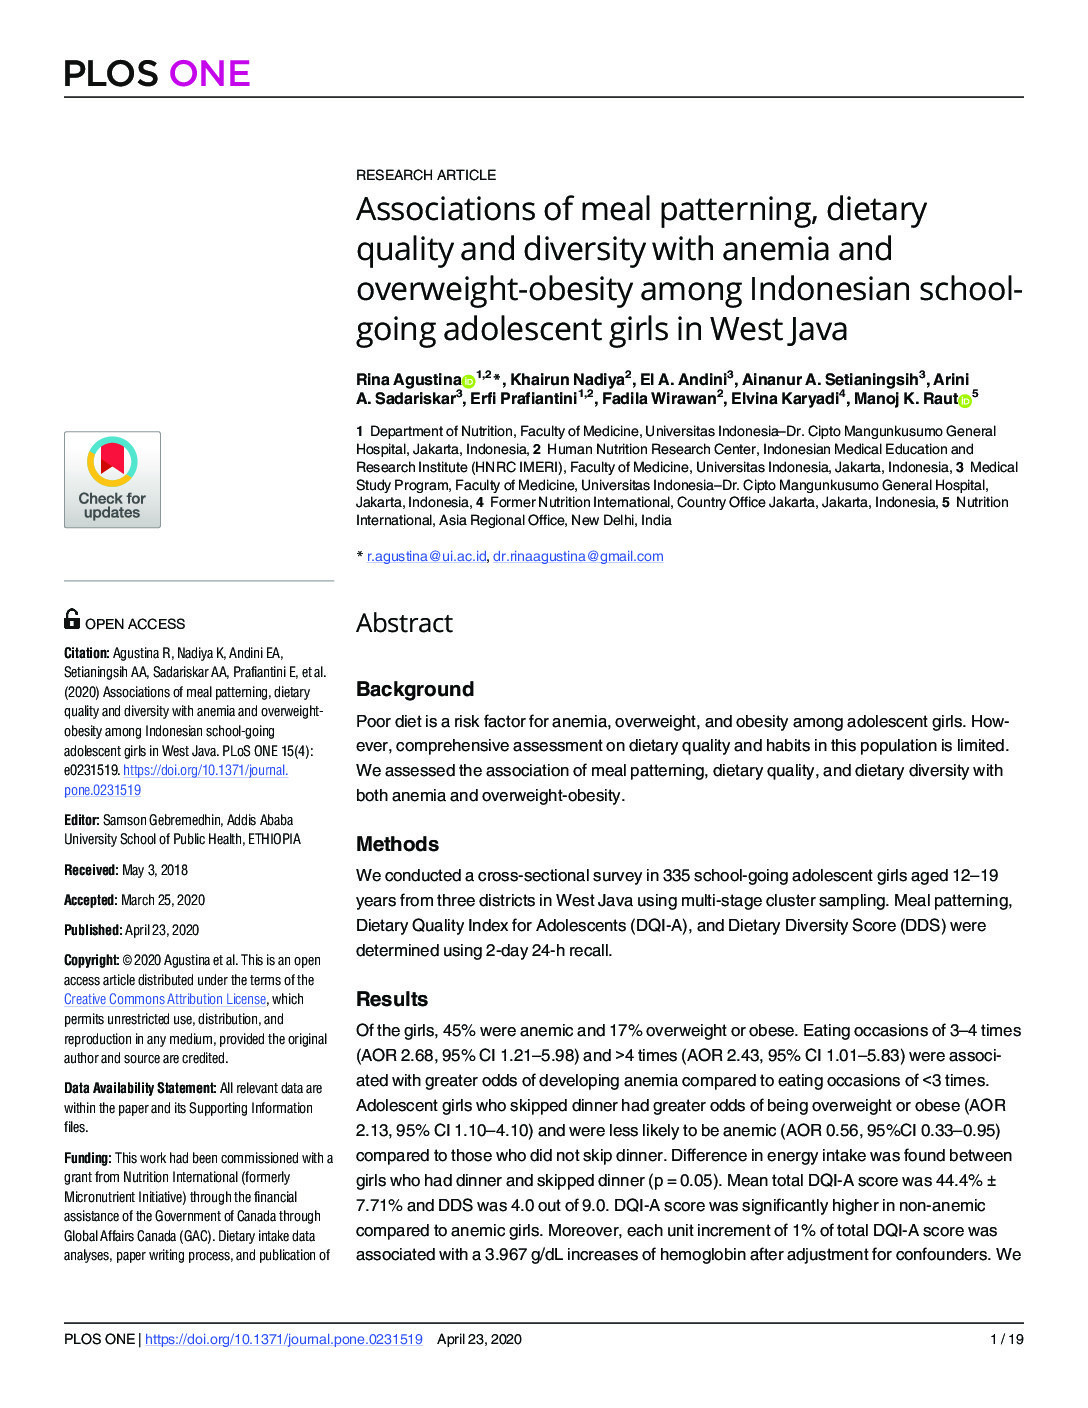 Associations of meal patterning, dietary quality and diversity with anemia and overweight-obesity among Indonesian school-going adolescent girls in West Java thumbnail